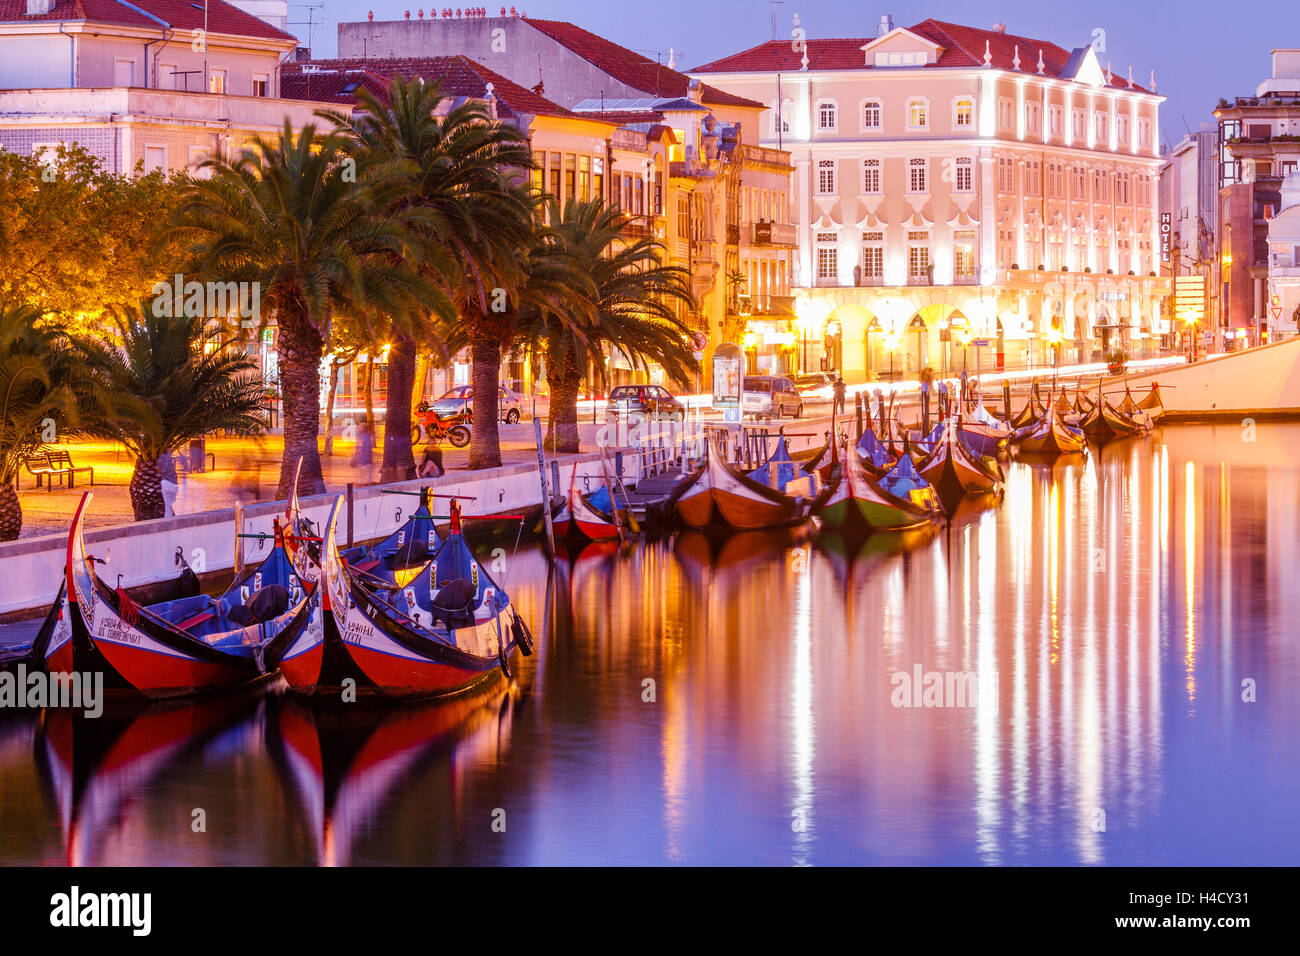 Sunset view of the city of Aveiro, Portugal. Stock Photo